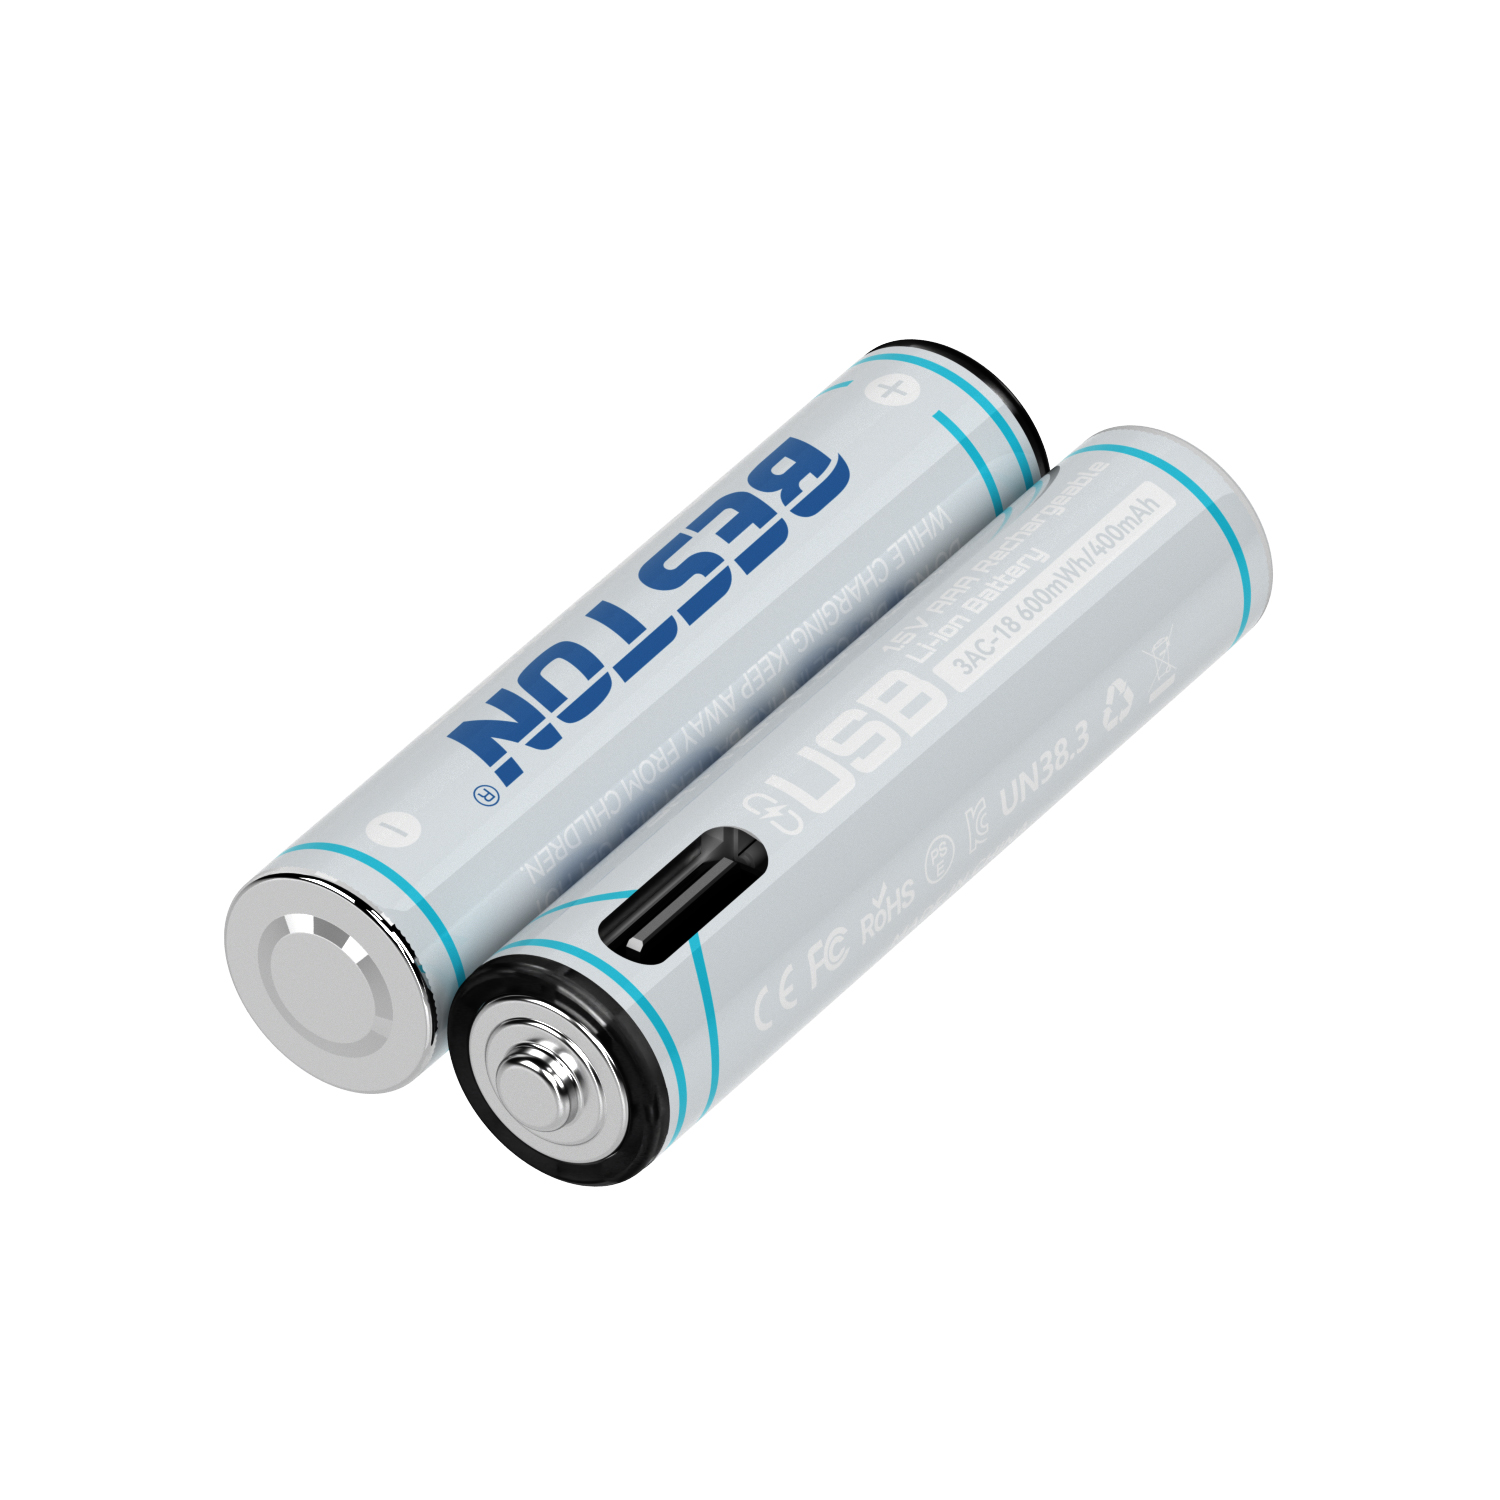 Batterie rechargeable au lithium Beston USB 1,5 V AAA 600 mWh